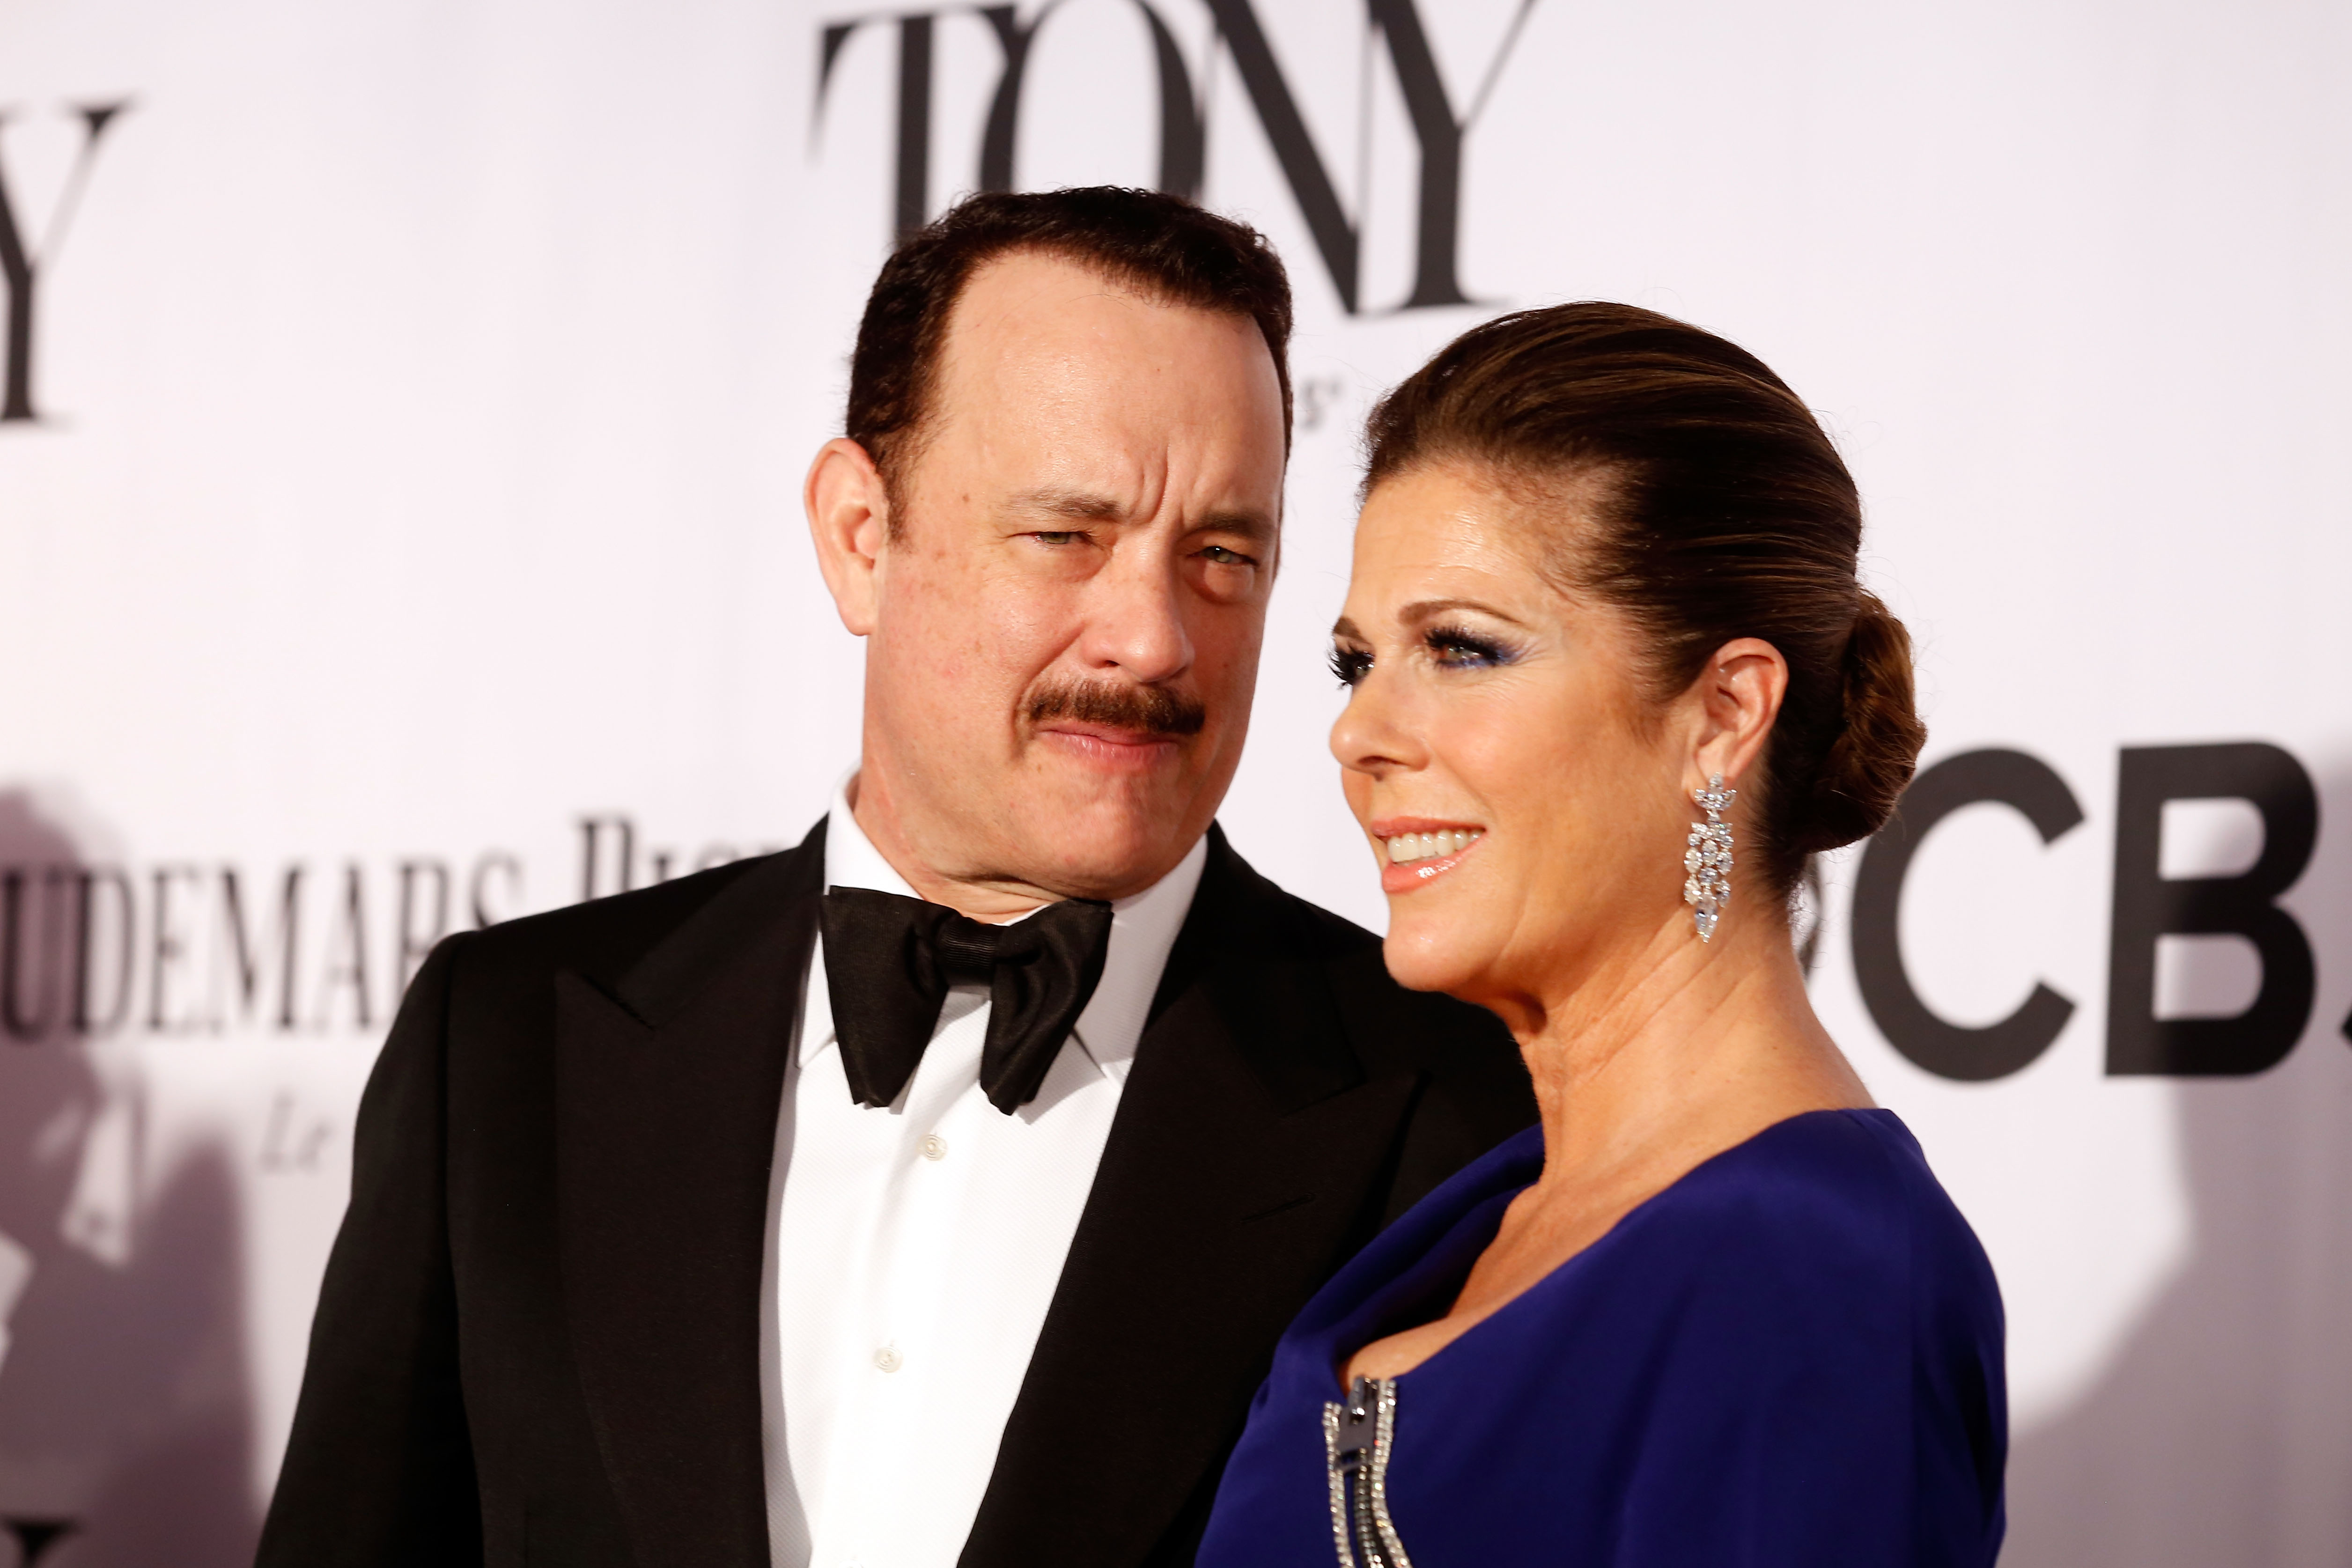 Tom Hanks and Rita Wilson at the 67th Annual Tony Awards in New York City on June 9, 2013 | Source: Getty Images